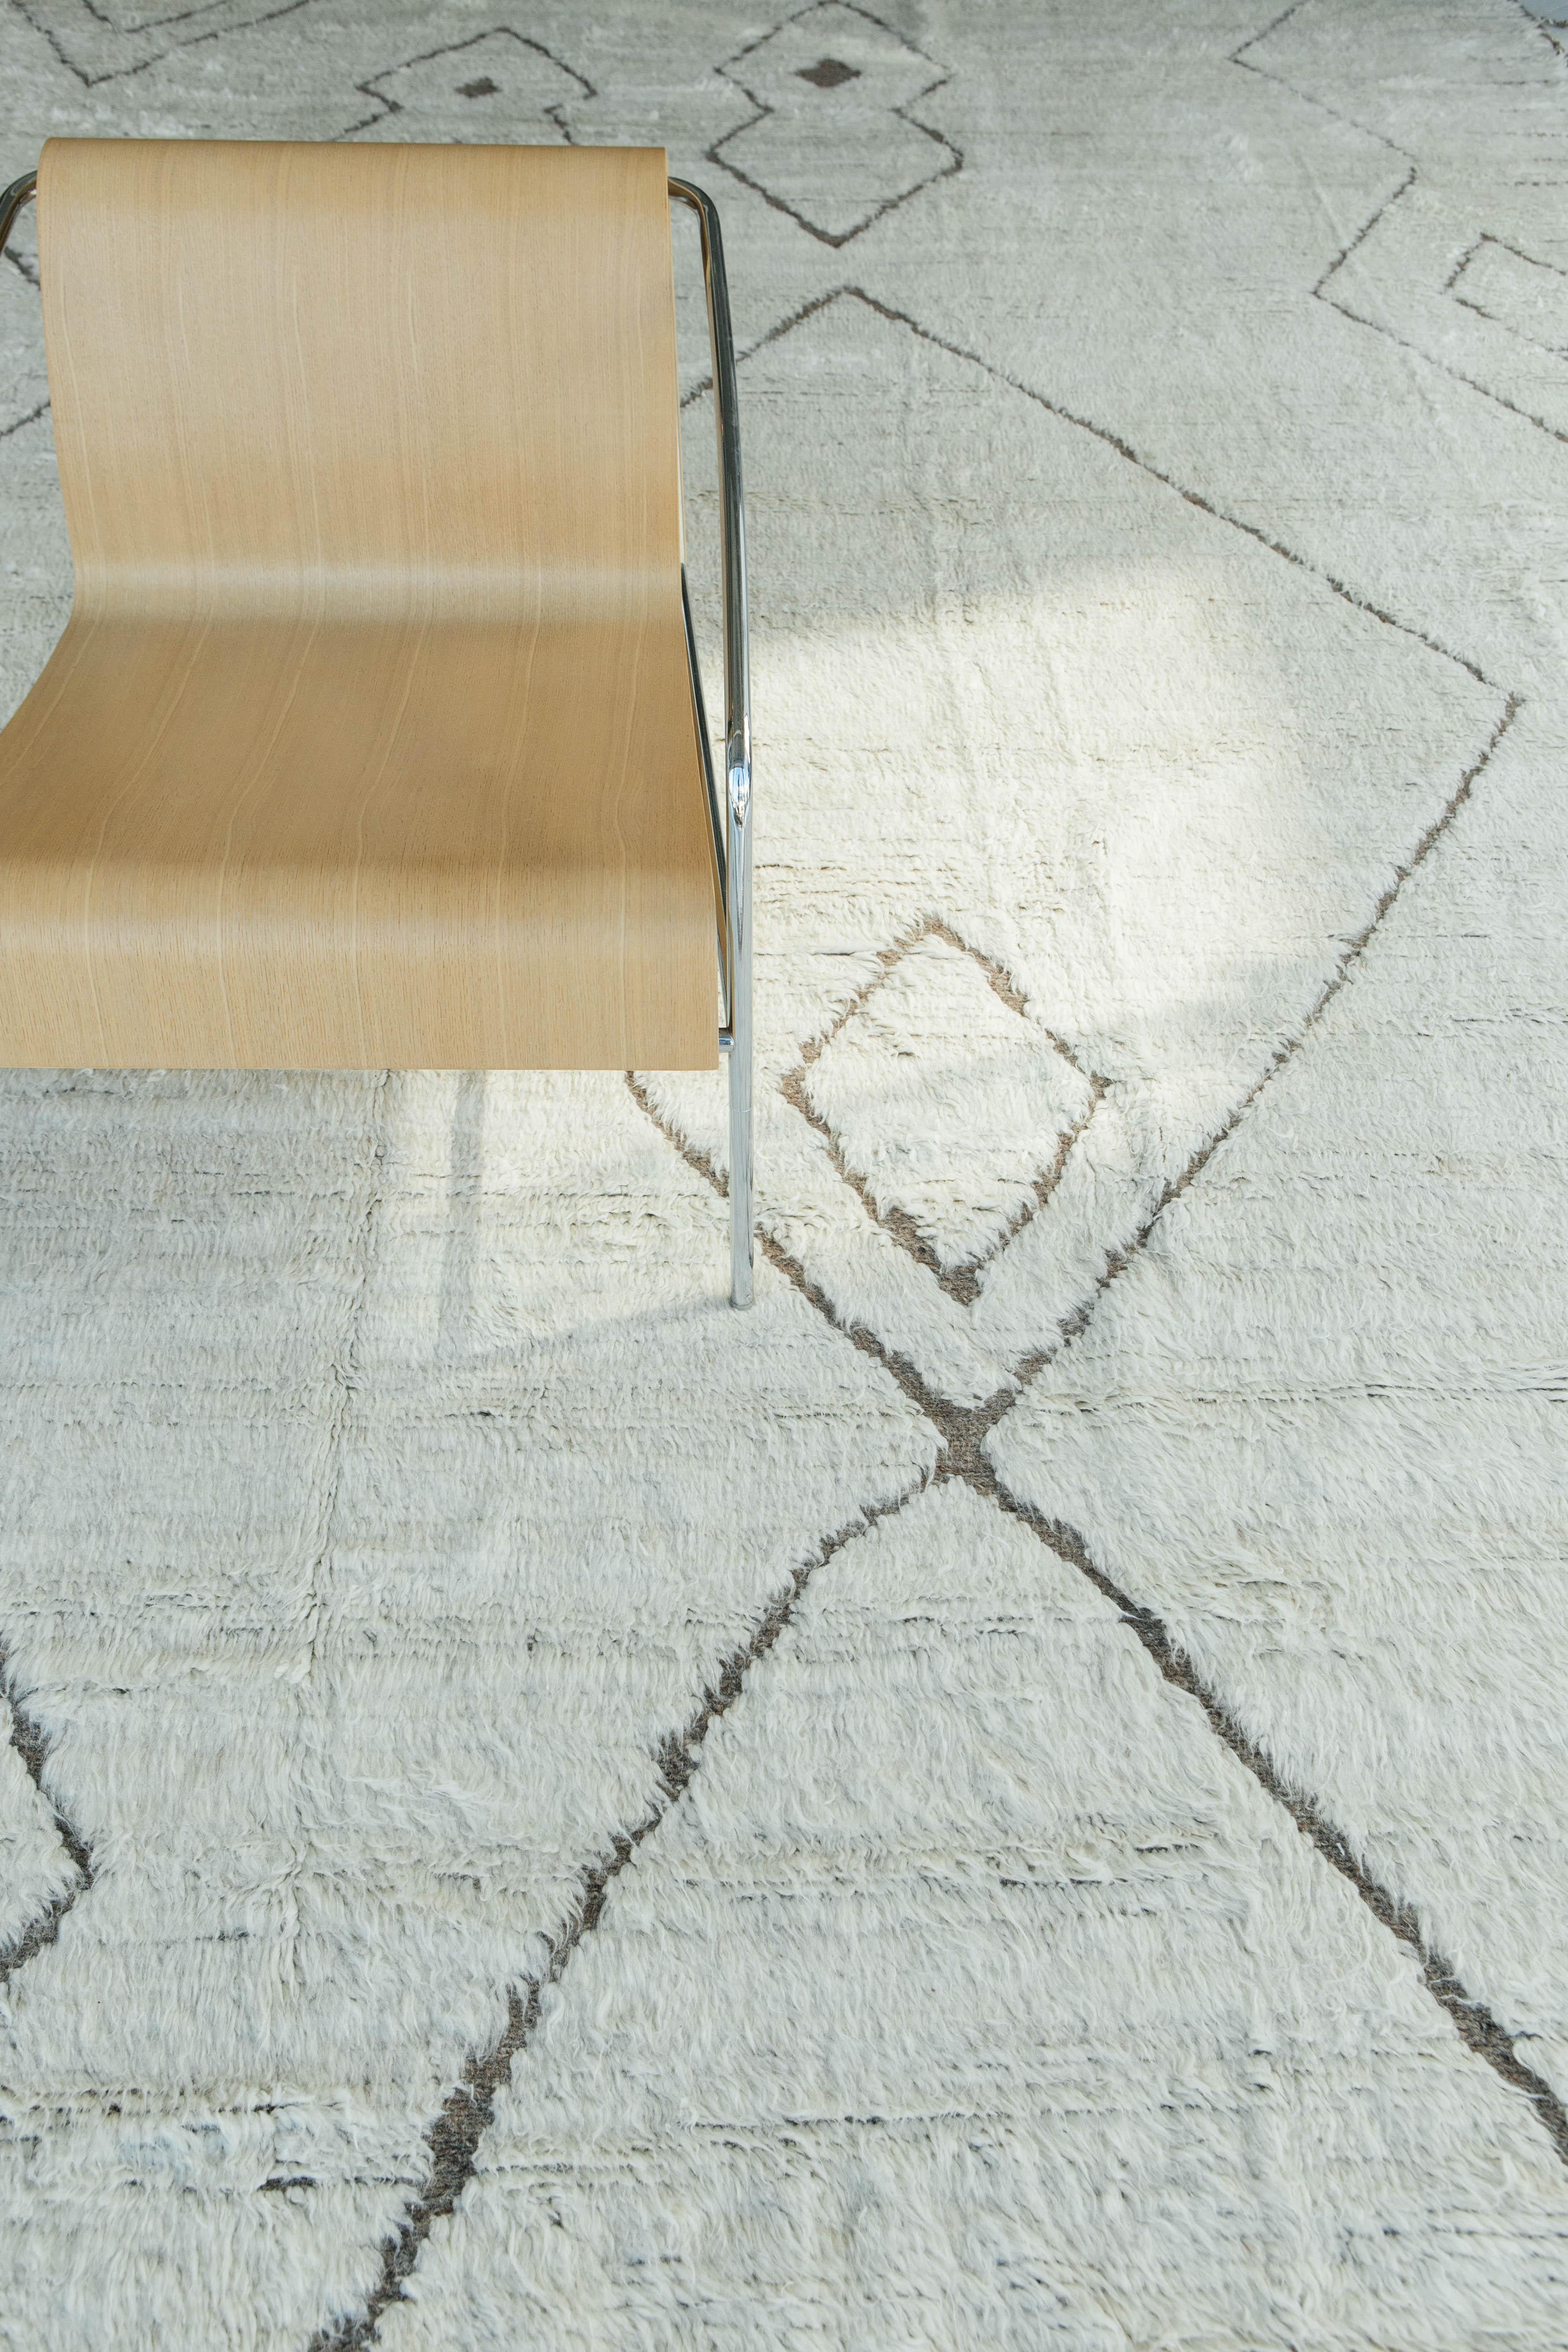 'Sambas' is a contemporary interpretation of an Azilal tribal rugs from Morocco. They are noted for their hand-spun wool, saturated color, intuitive motifs and charmingly irregular surface. Created with the perfect shade of white shag, taupe